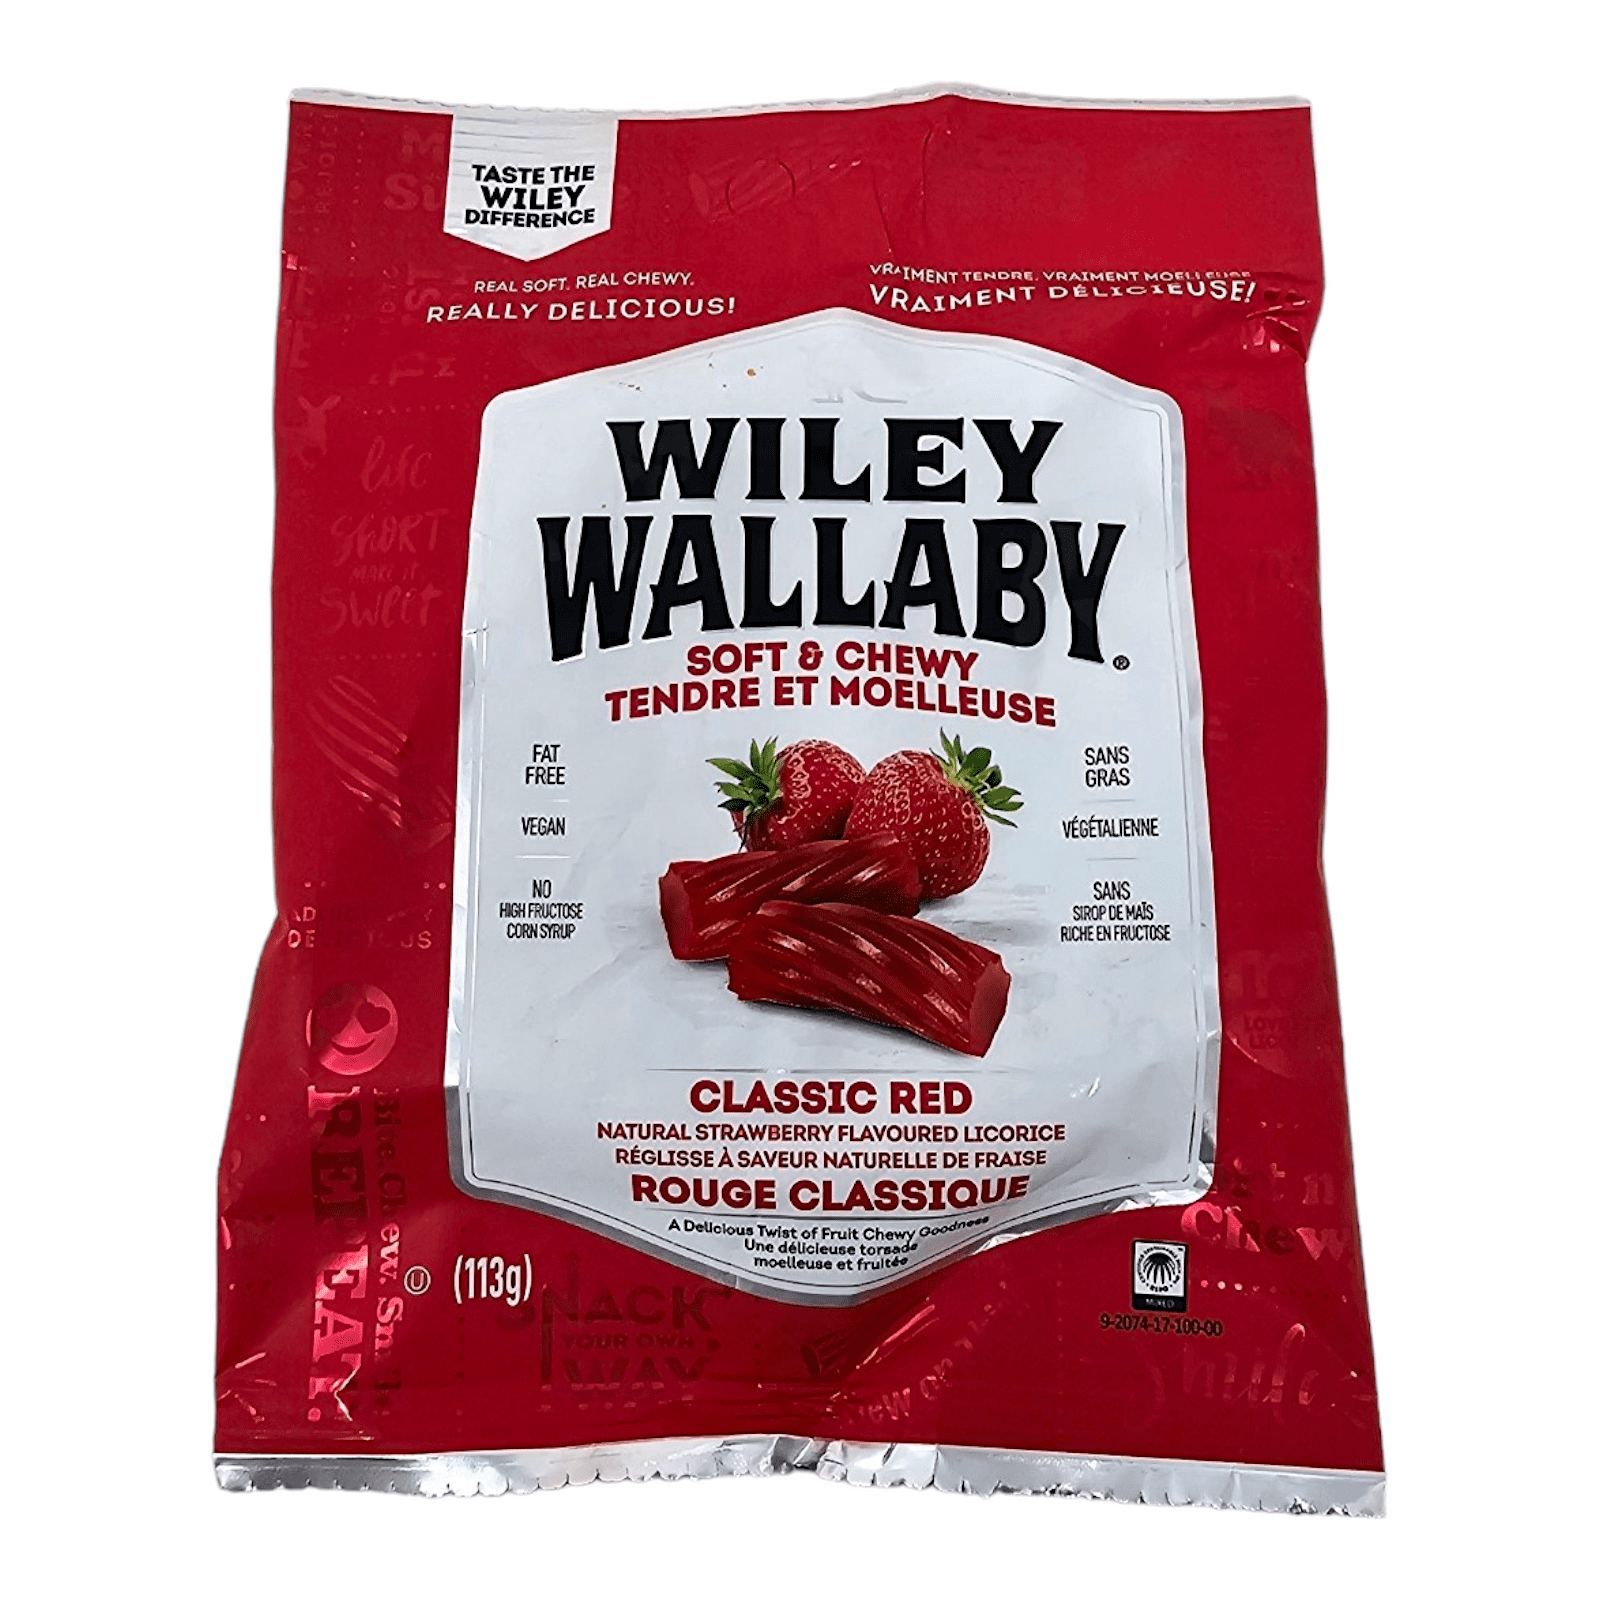 Wiley Wallaby Classic Red Licorice (113g)